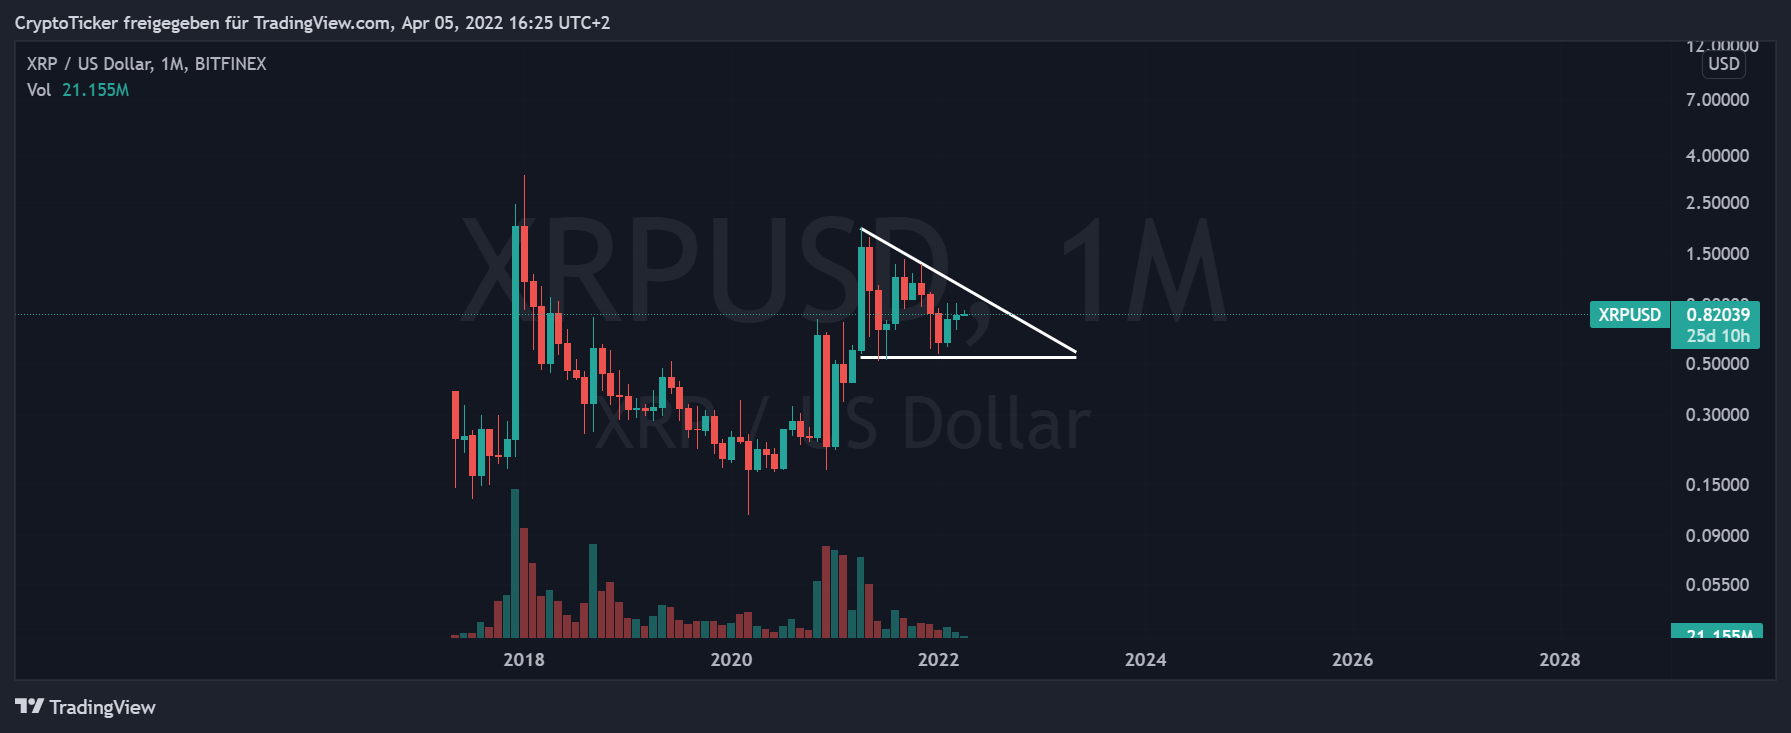 XRP/USD 1-month chart sh9wing the descending triangle